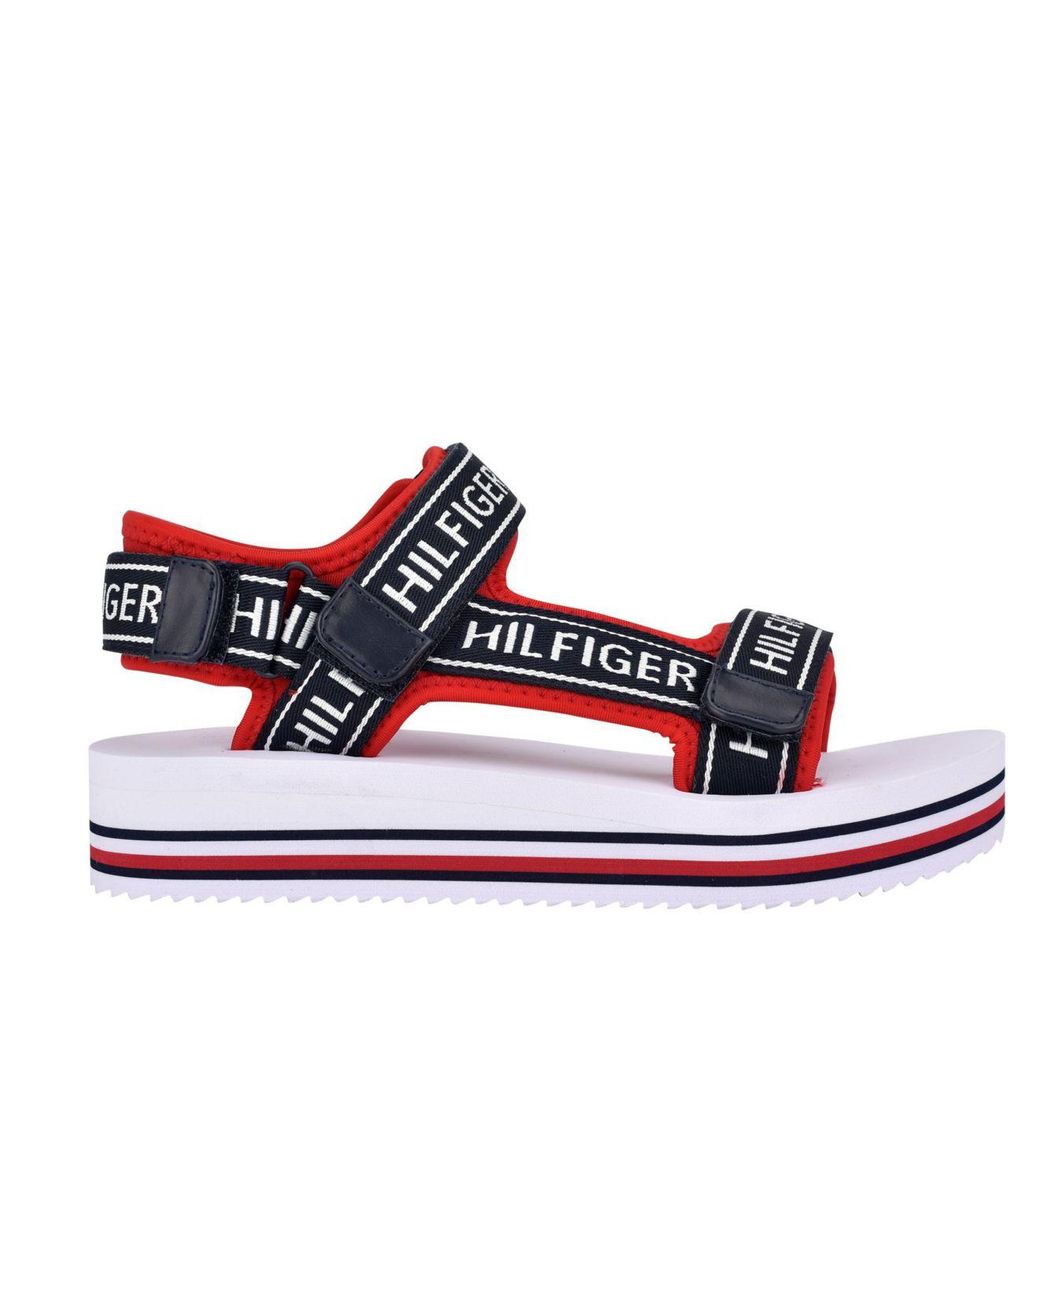 Tommy Hilfiger Women's Nurii Hook and Loop Sport Sandals Women's Shoes -  ShopStyle